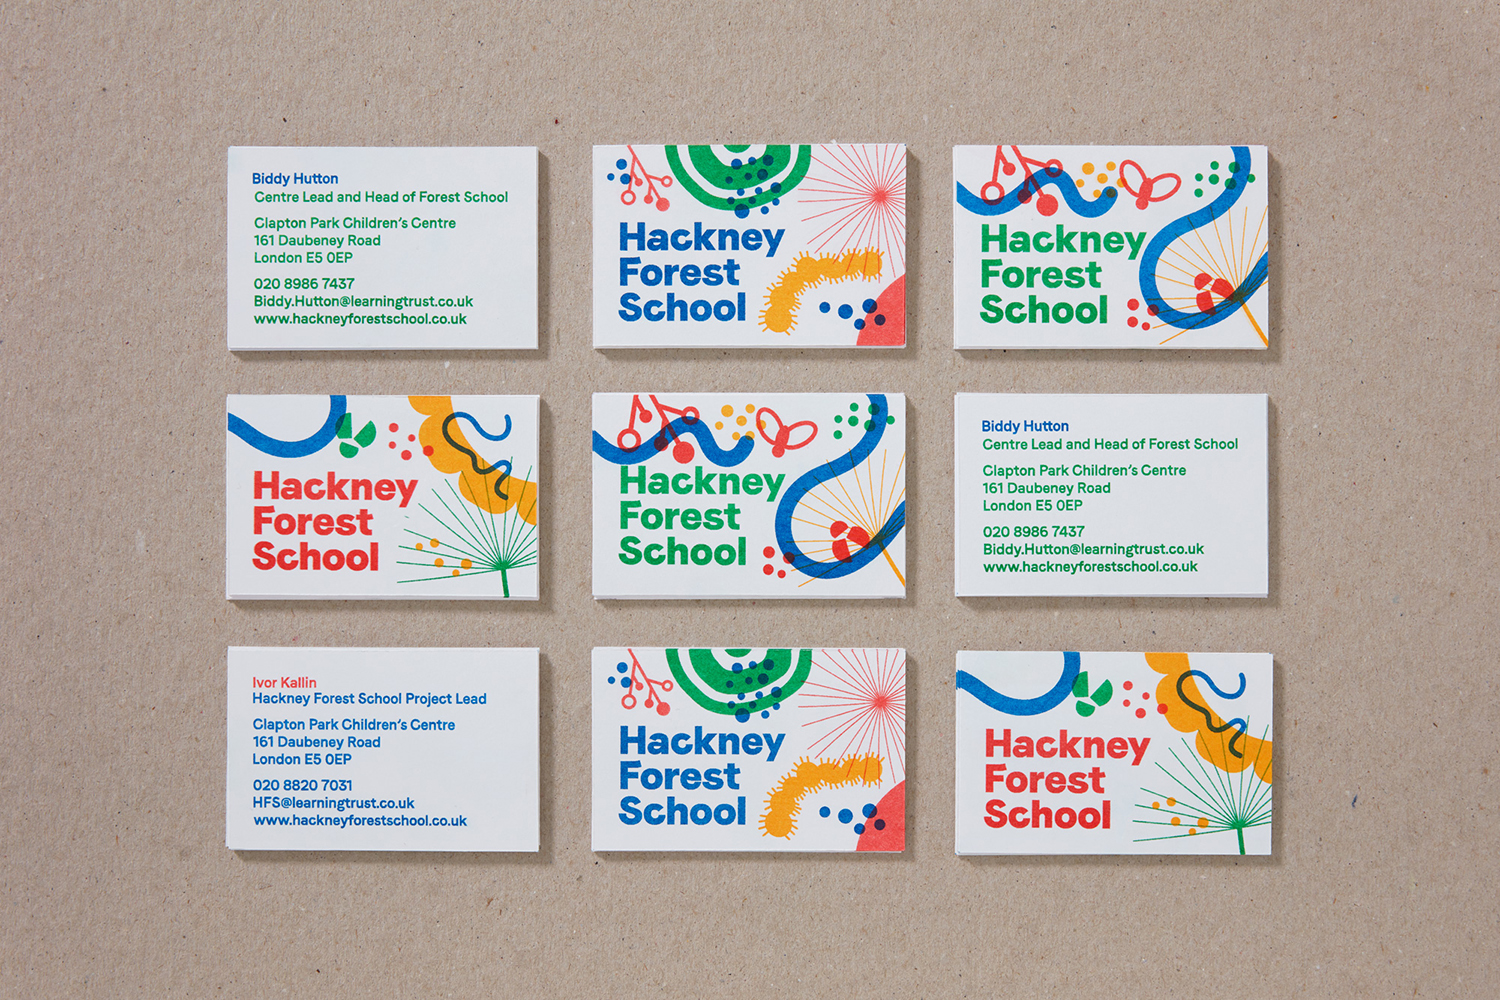 Creative Business Cards – Hackney Forest School by Spy